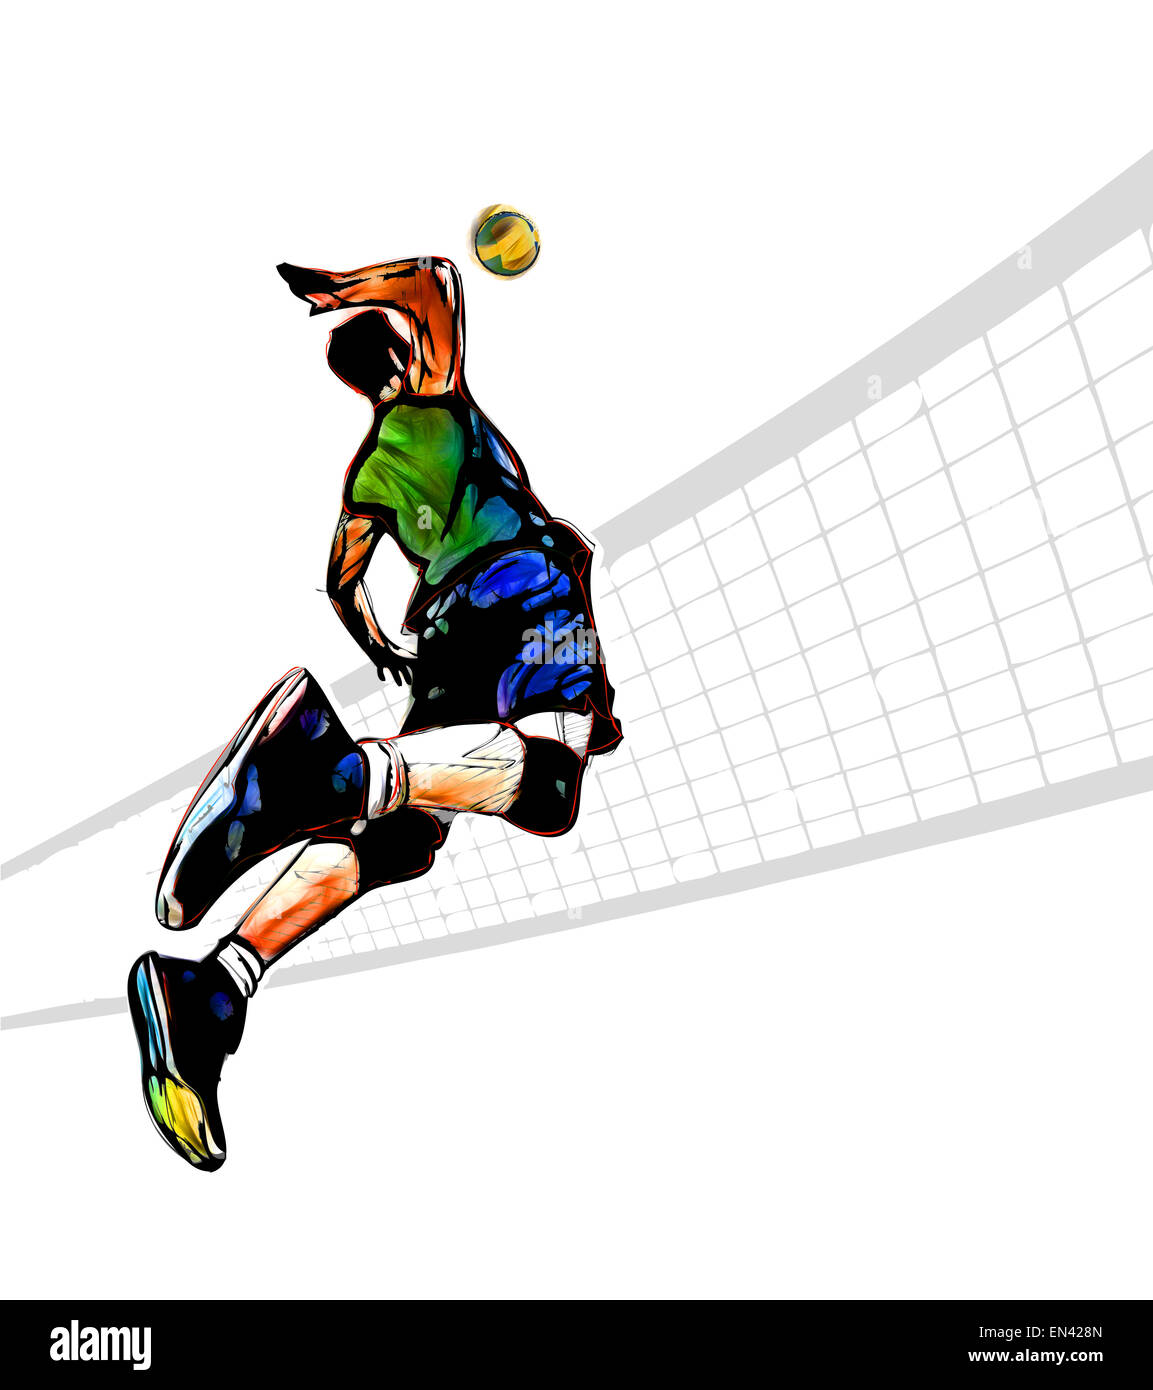 Volleyball Backgrounds Hd